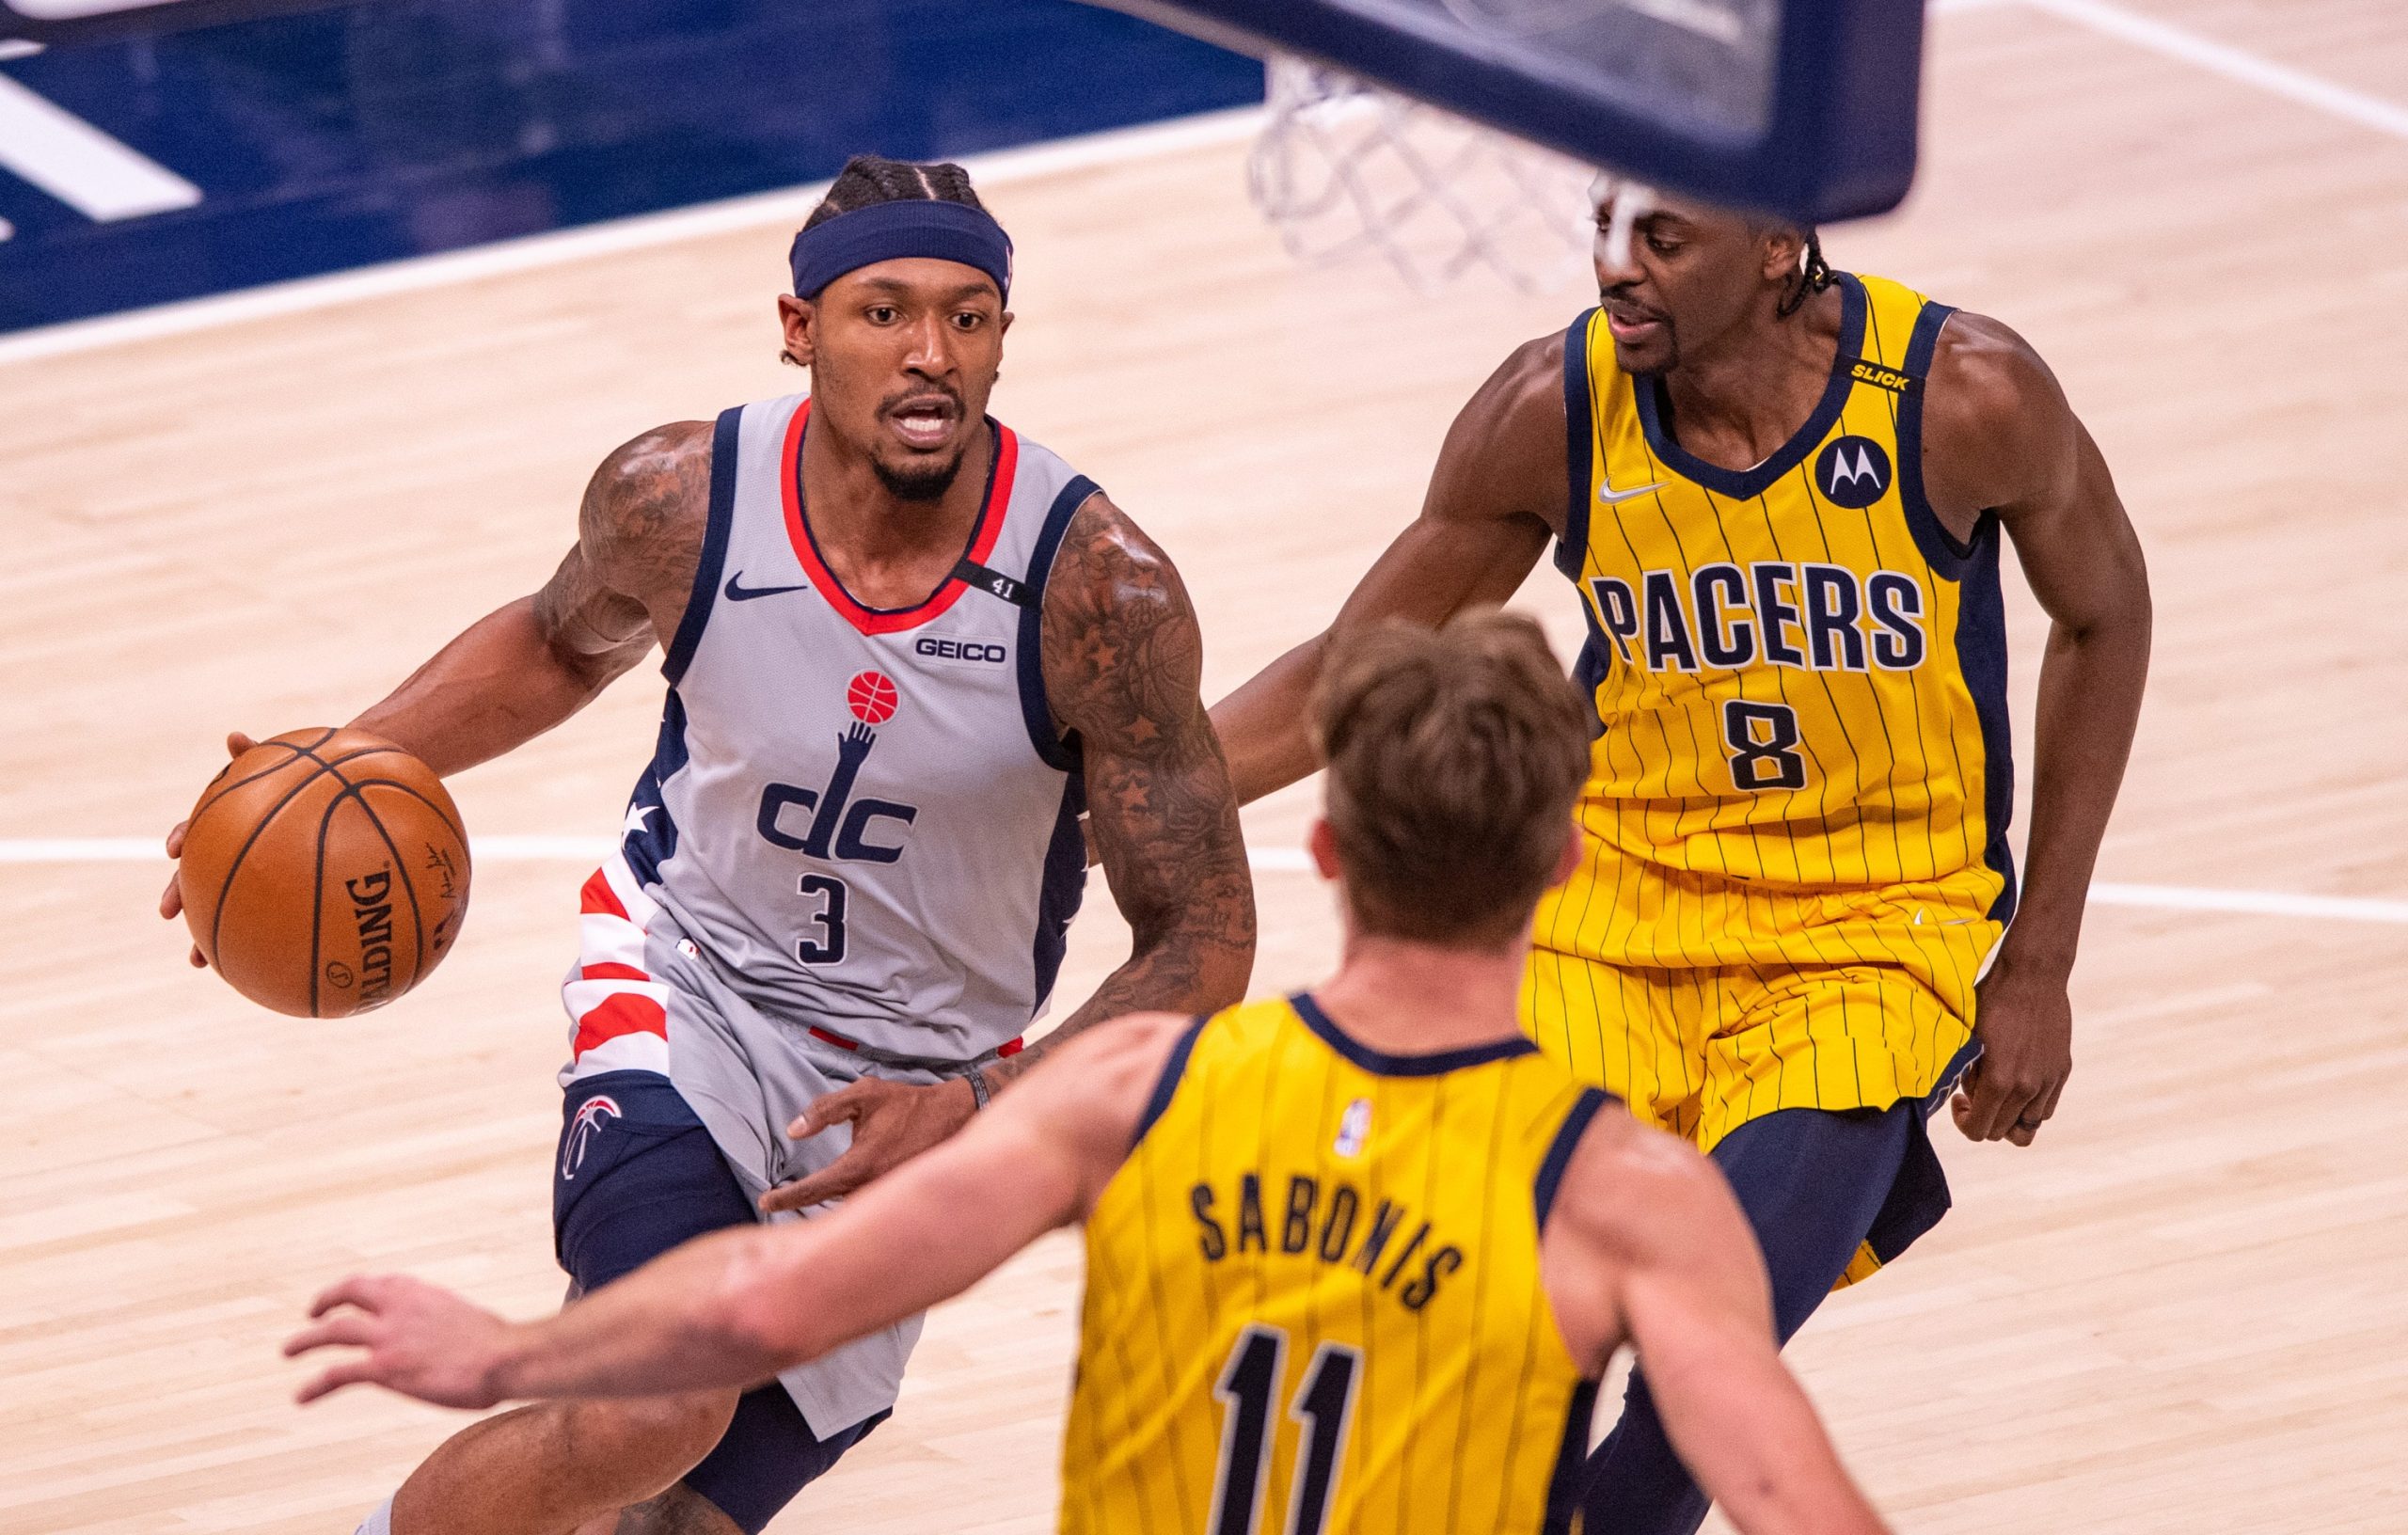 Washington Wizards guard Bradley Beal (3) drives to the basket during the second half of an NBA basketball game against the Indiana Pacers at Bankers Life Fieldhouse.